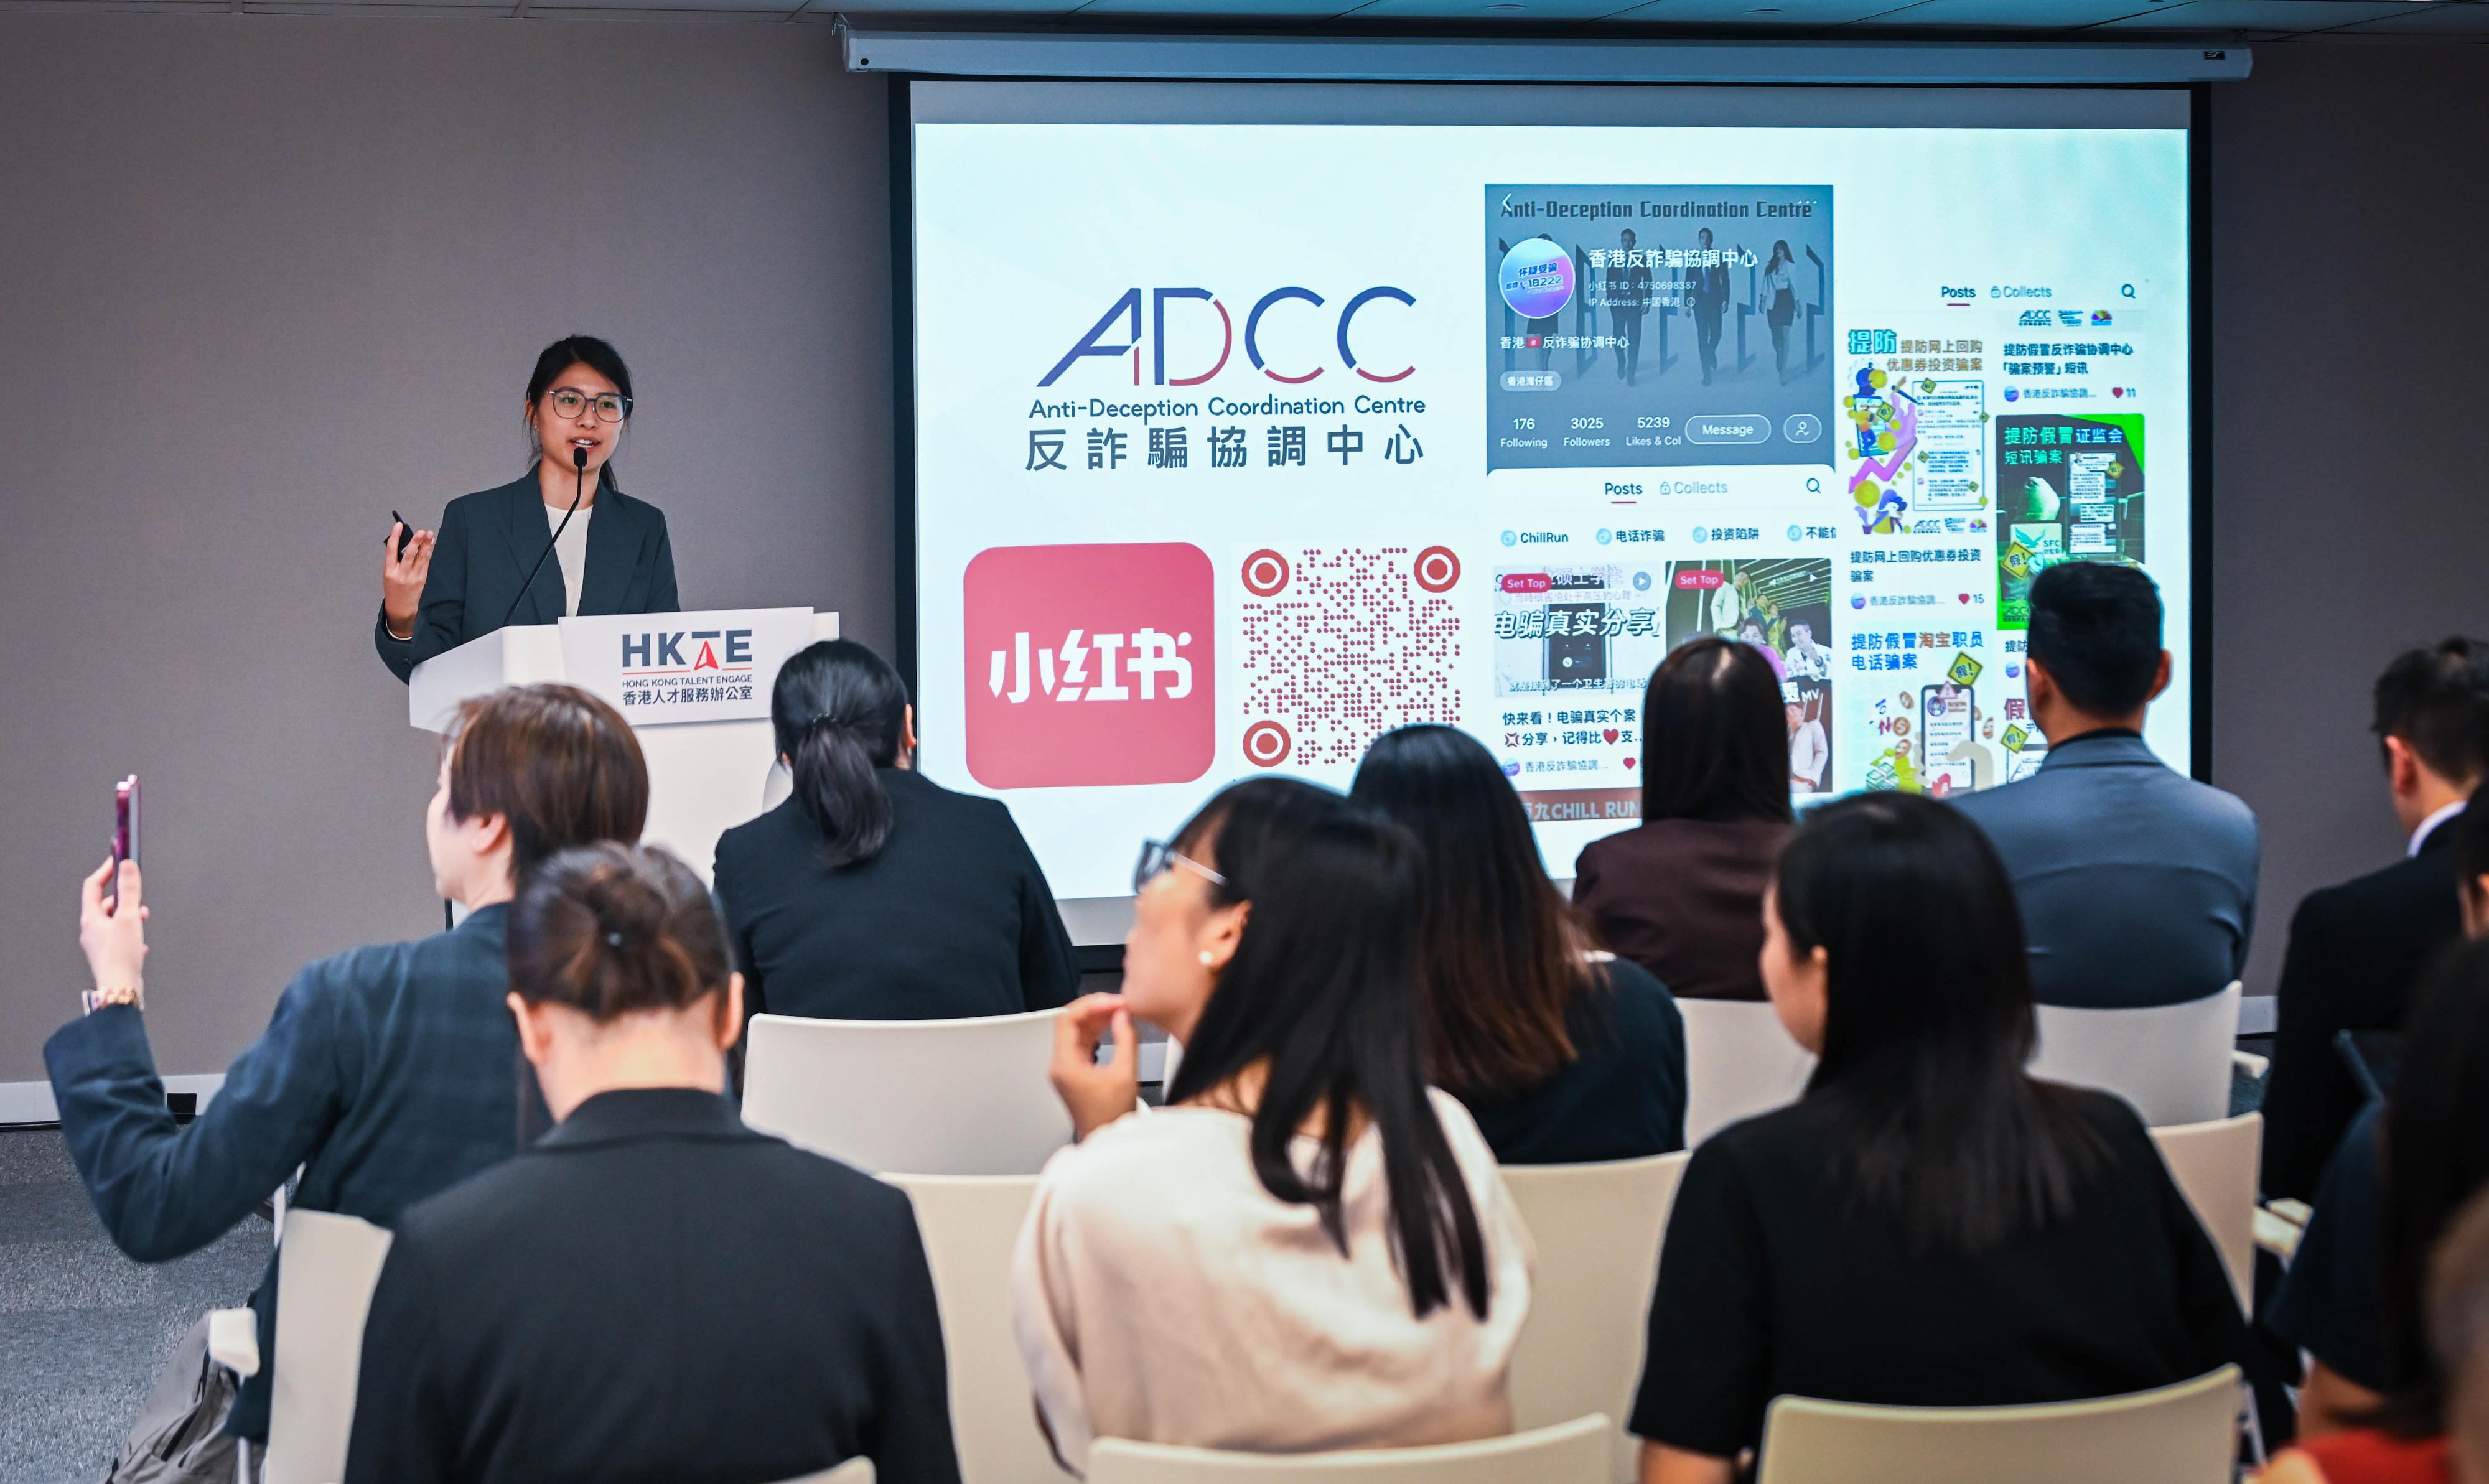 Hong Kong Talent Engage today (June 27) hosted a themed seminar to brief incoming talent on corruption prevention and anti-deception practices to raise their awareness of the relevant crimes. Photo shows a representative of the Anti-Deception Coordination Centre of the Commercial Crime Bureau of the Hong Kong Police Force updating incoming talent on the latest deception trends at the seminar.